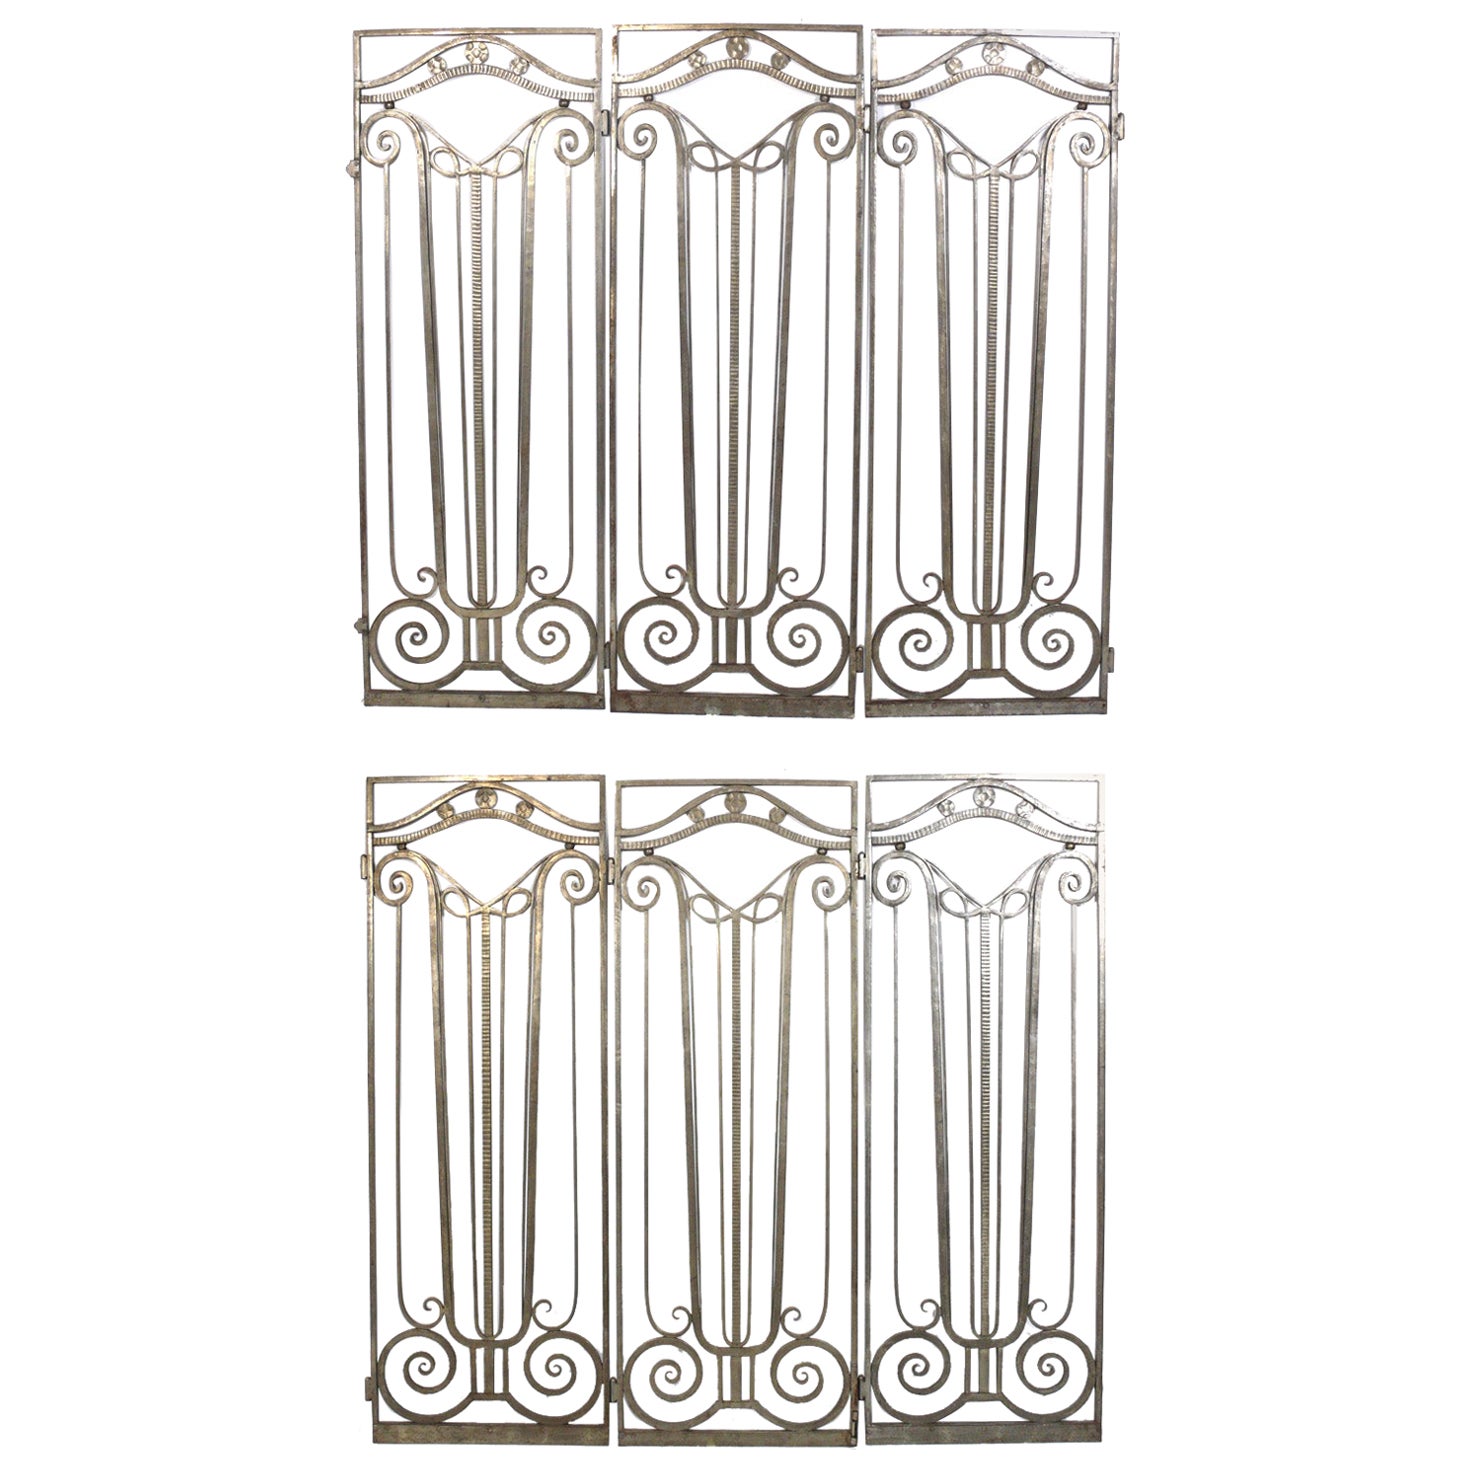 French Art Deco Silvered Iron Gates circa 1930s Six Total 70" x 26" each approx For Sale